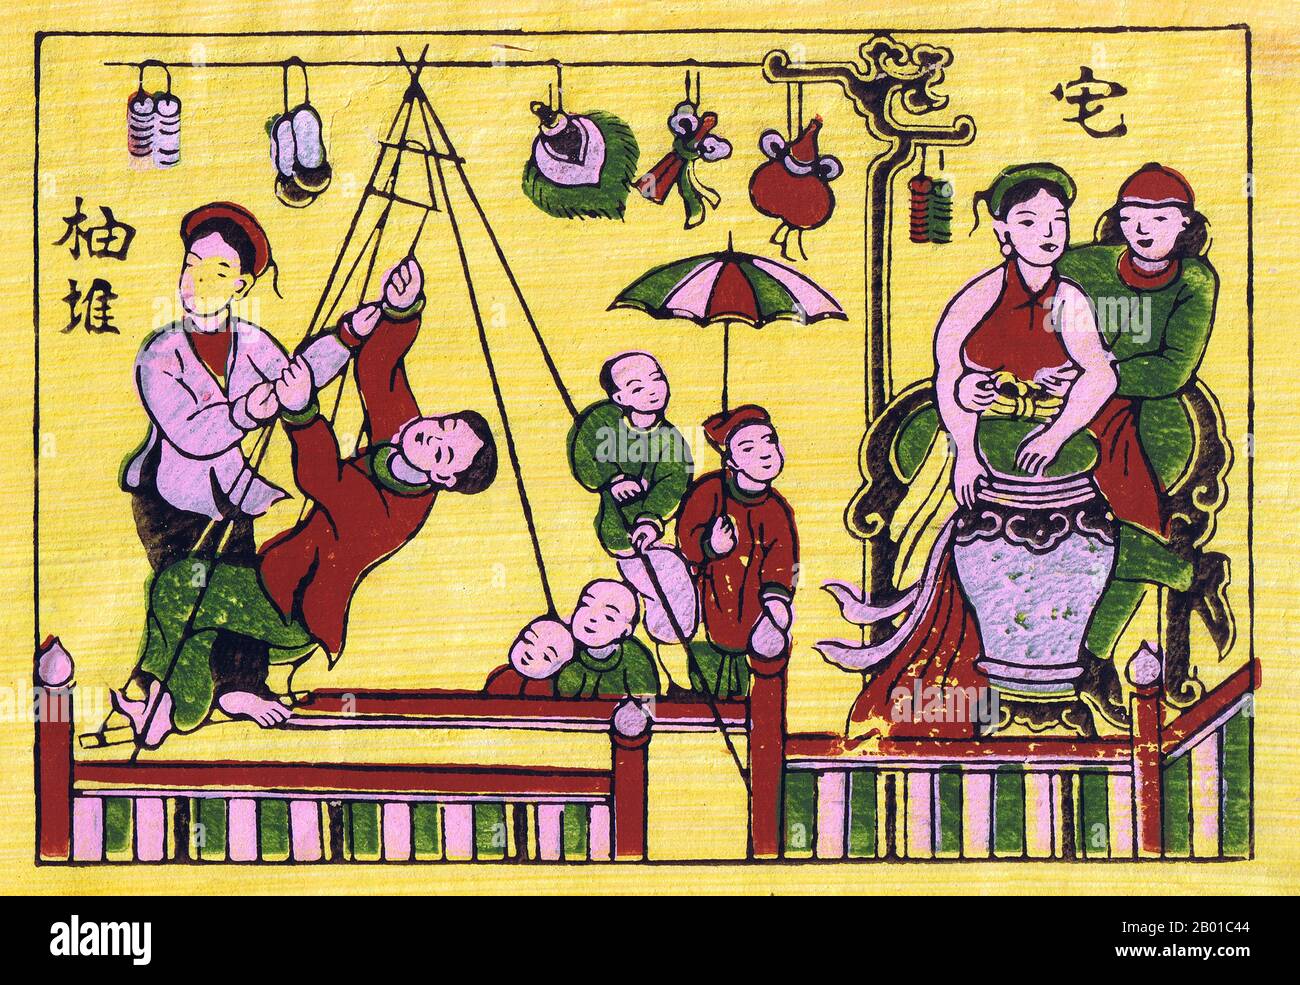 Vietnam: A village fair in Tonkin - traditional woodblock painting from Dong Ho village, Bac Ninh Province.  Dong Ho painting (Vietnamese: Tranh Đông Hồ or Tranh làng Hồ), full name Dong Ho folk woodcut painting (Tranh khắc gỗ dân gian Đông Hồ) is a genre of Vietnamese woodcut paintings originating from Dong Ho village (làng Đông Hồ) in Bac Ninh Province, Vietnam.  Using the traditional điệp paper and colours derived from nature, craftsmen print Dong Ho pictures of different themes from good luck wishes, historical figures to everyday activities and folk allegories. Stock Photo